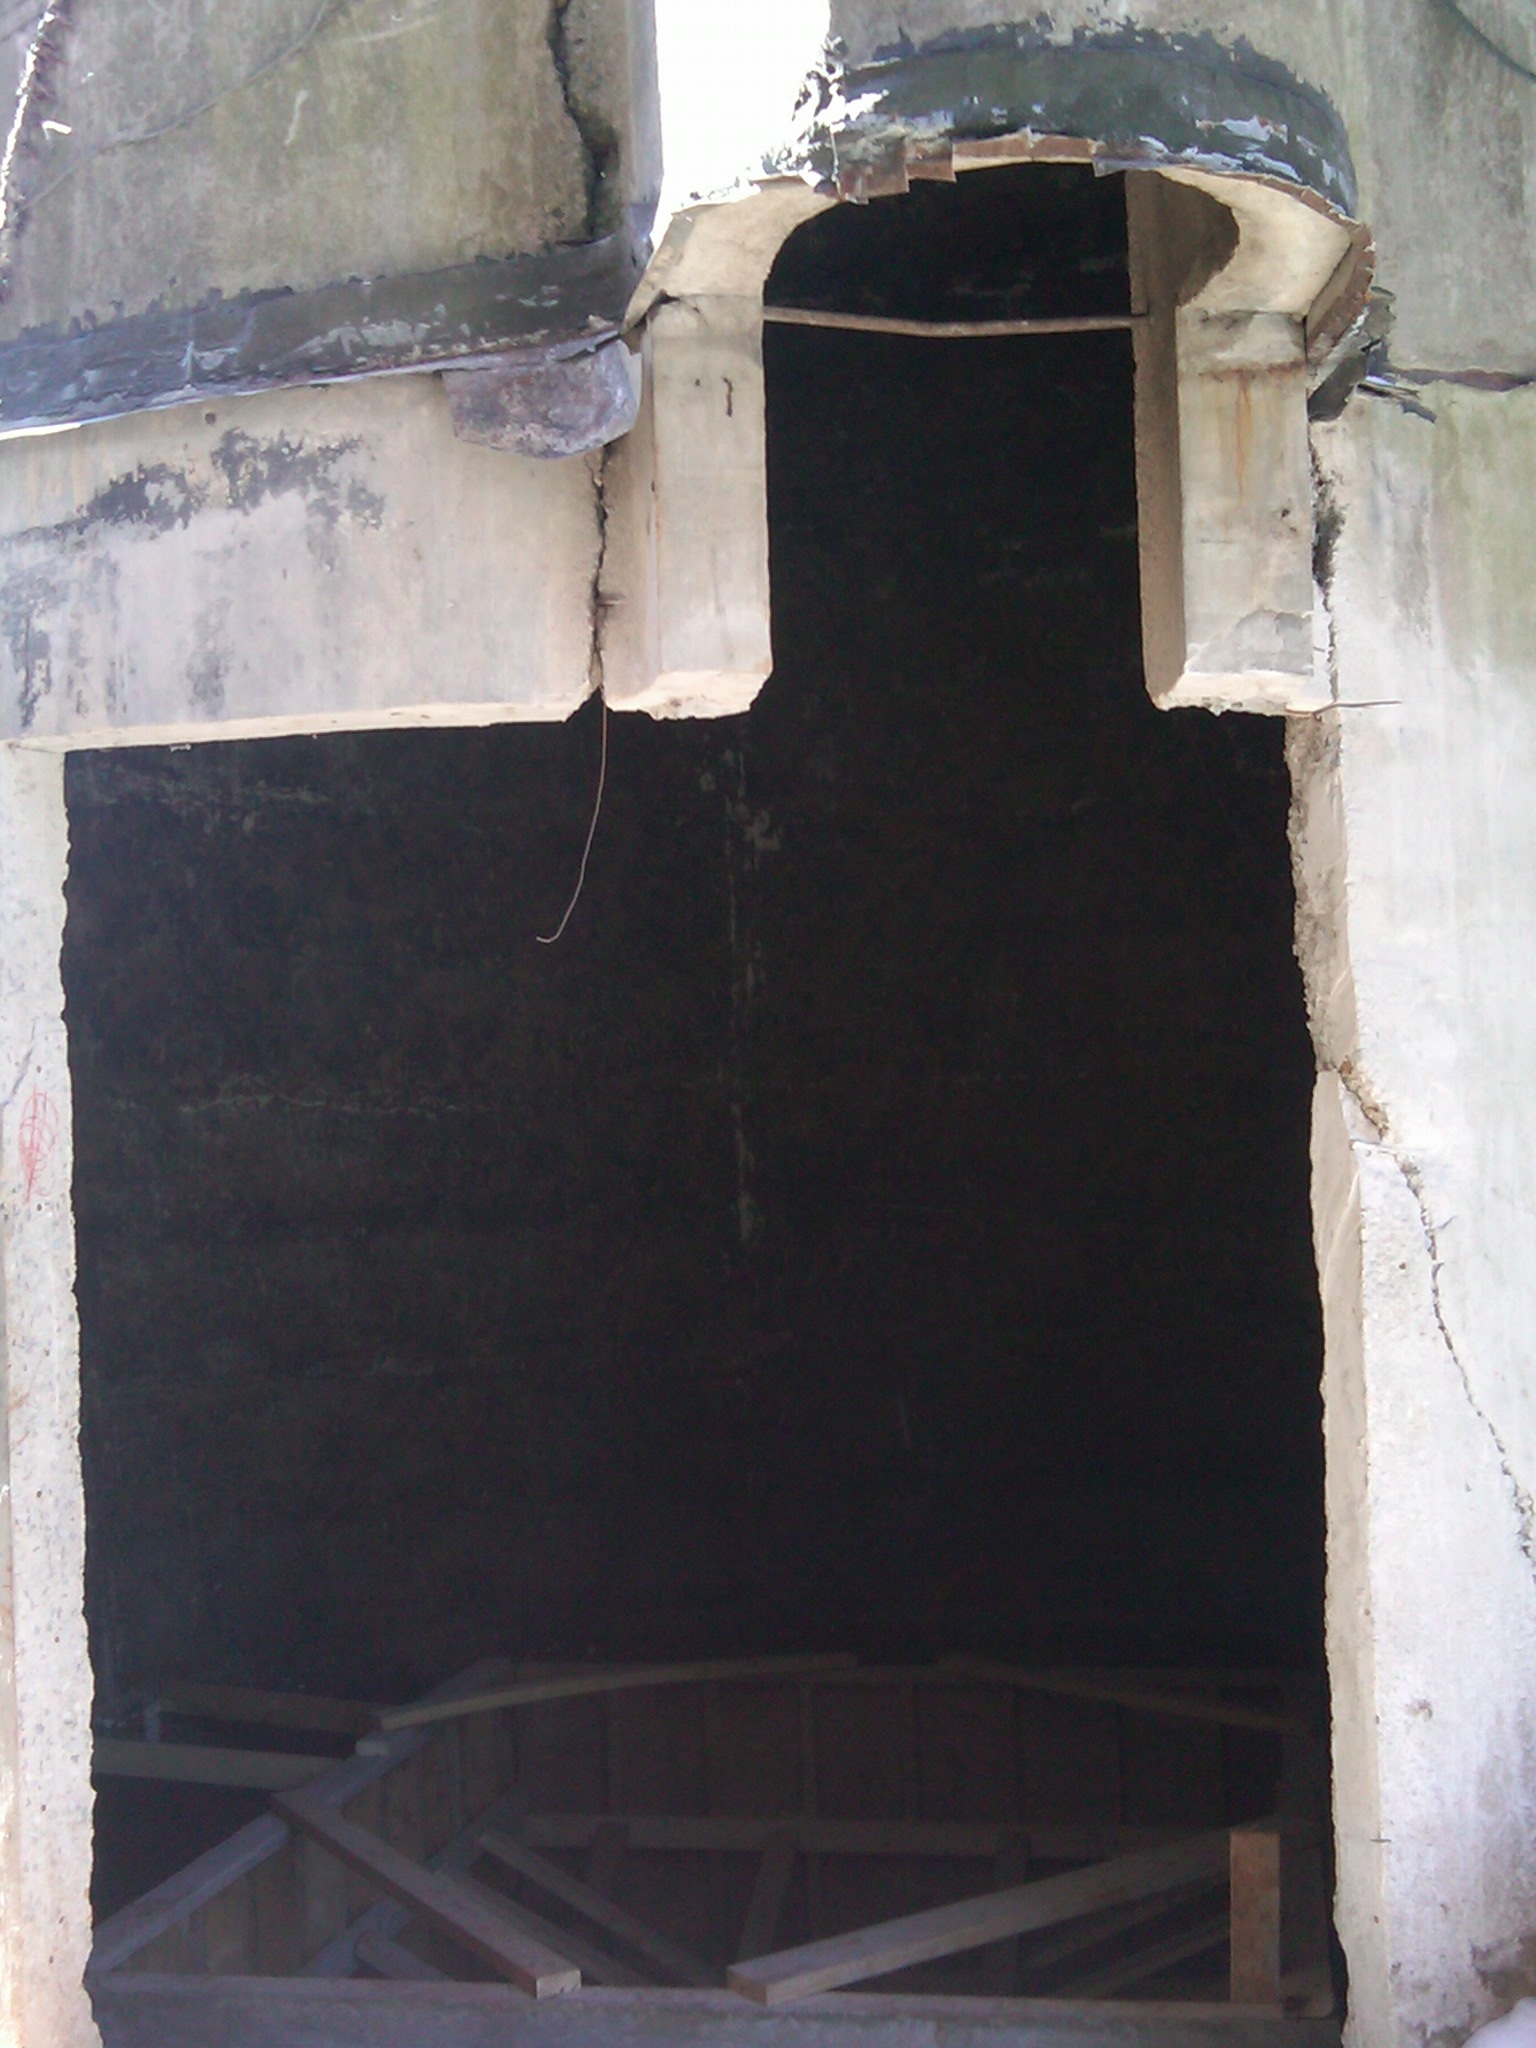 A peek into a silo... You can see the startings of an elevator shaft below.